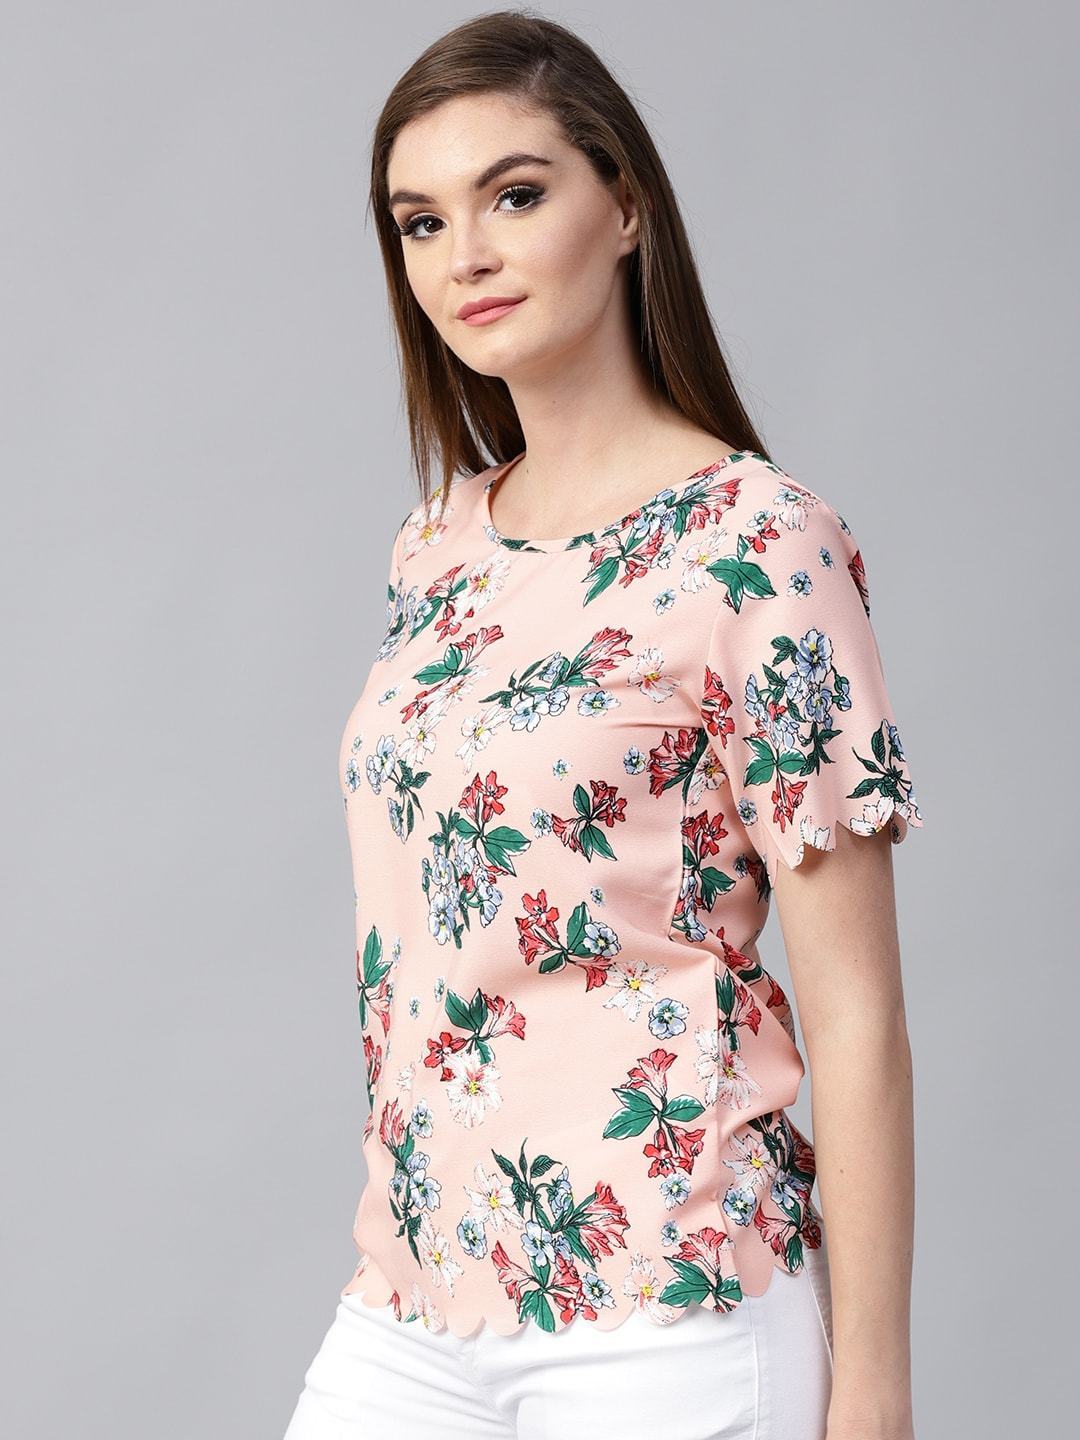 Women's Peach Floral Scalloped Top - Pannkh